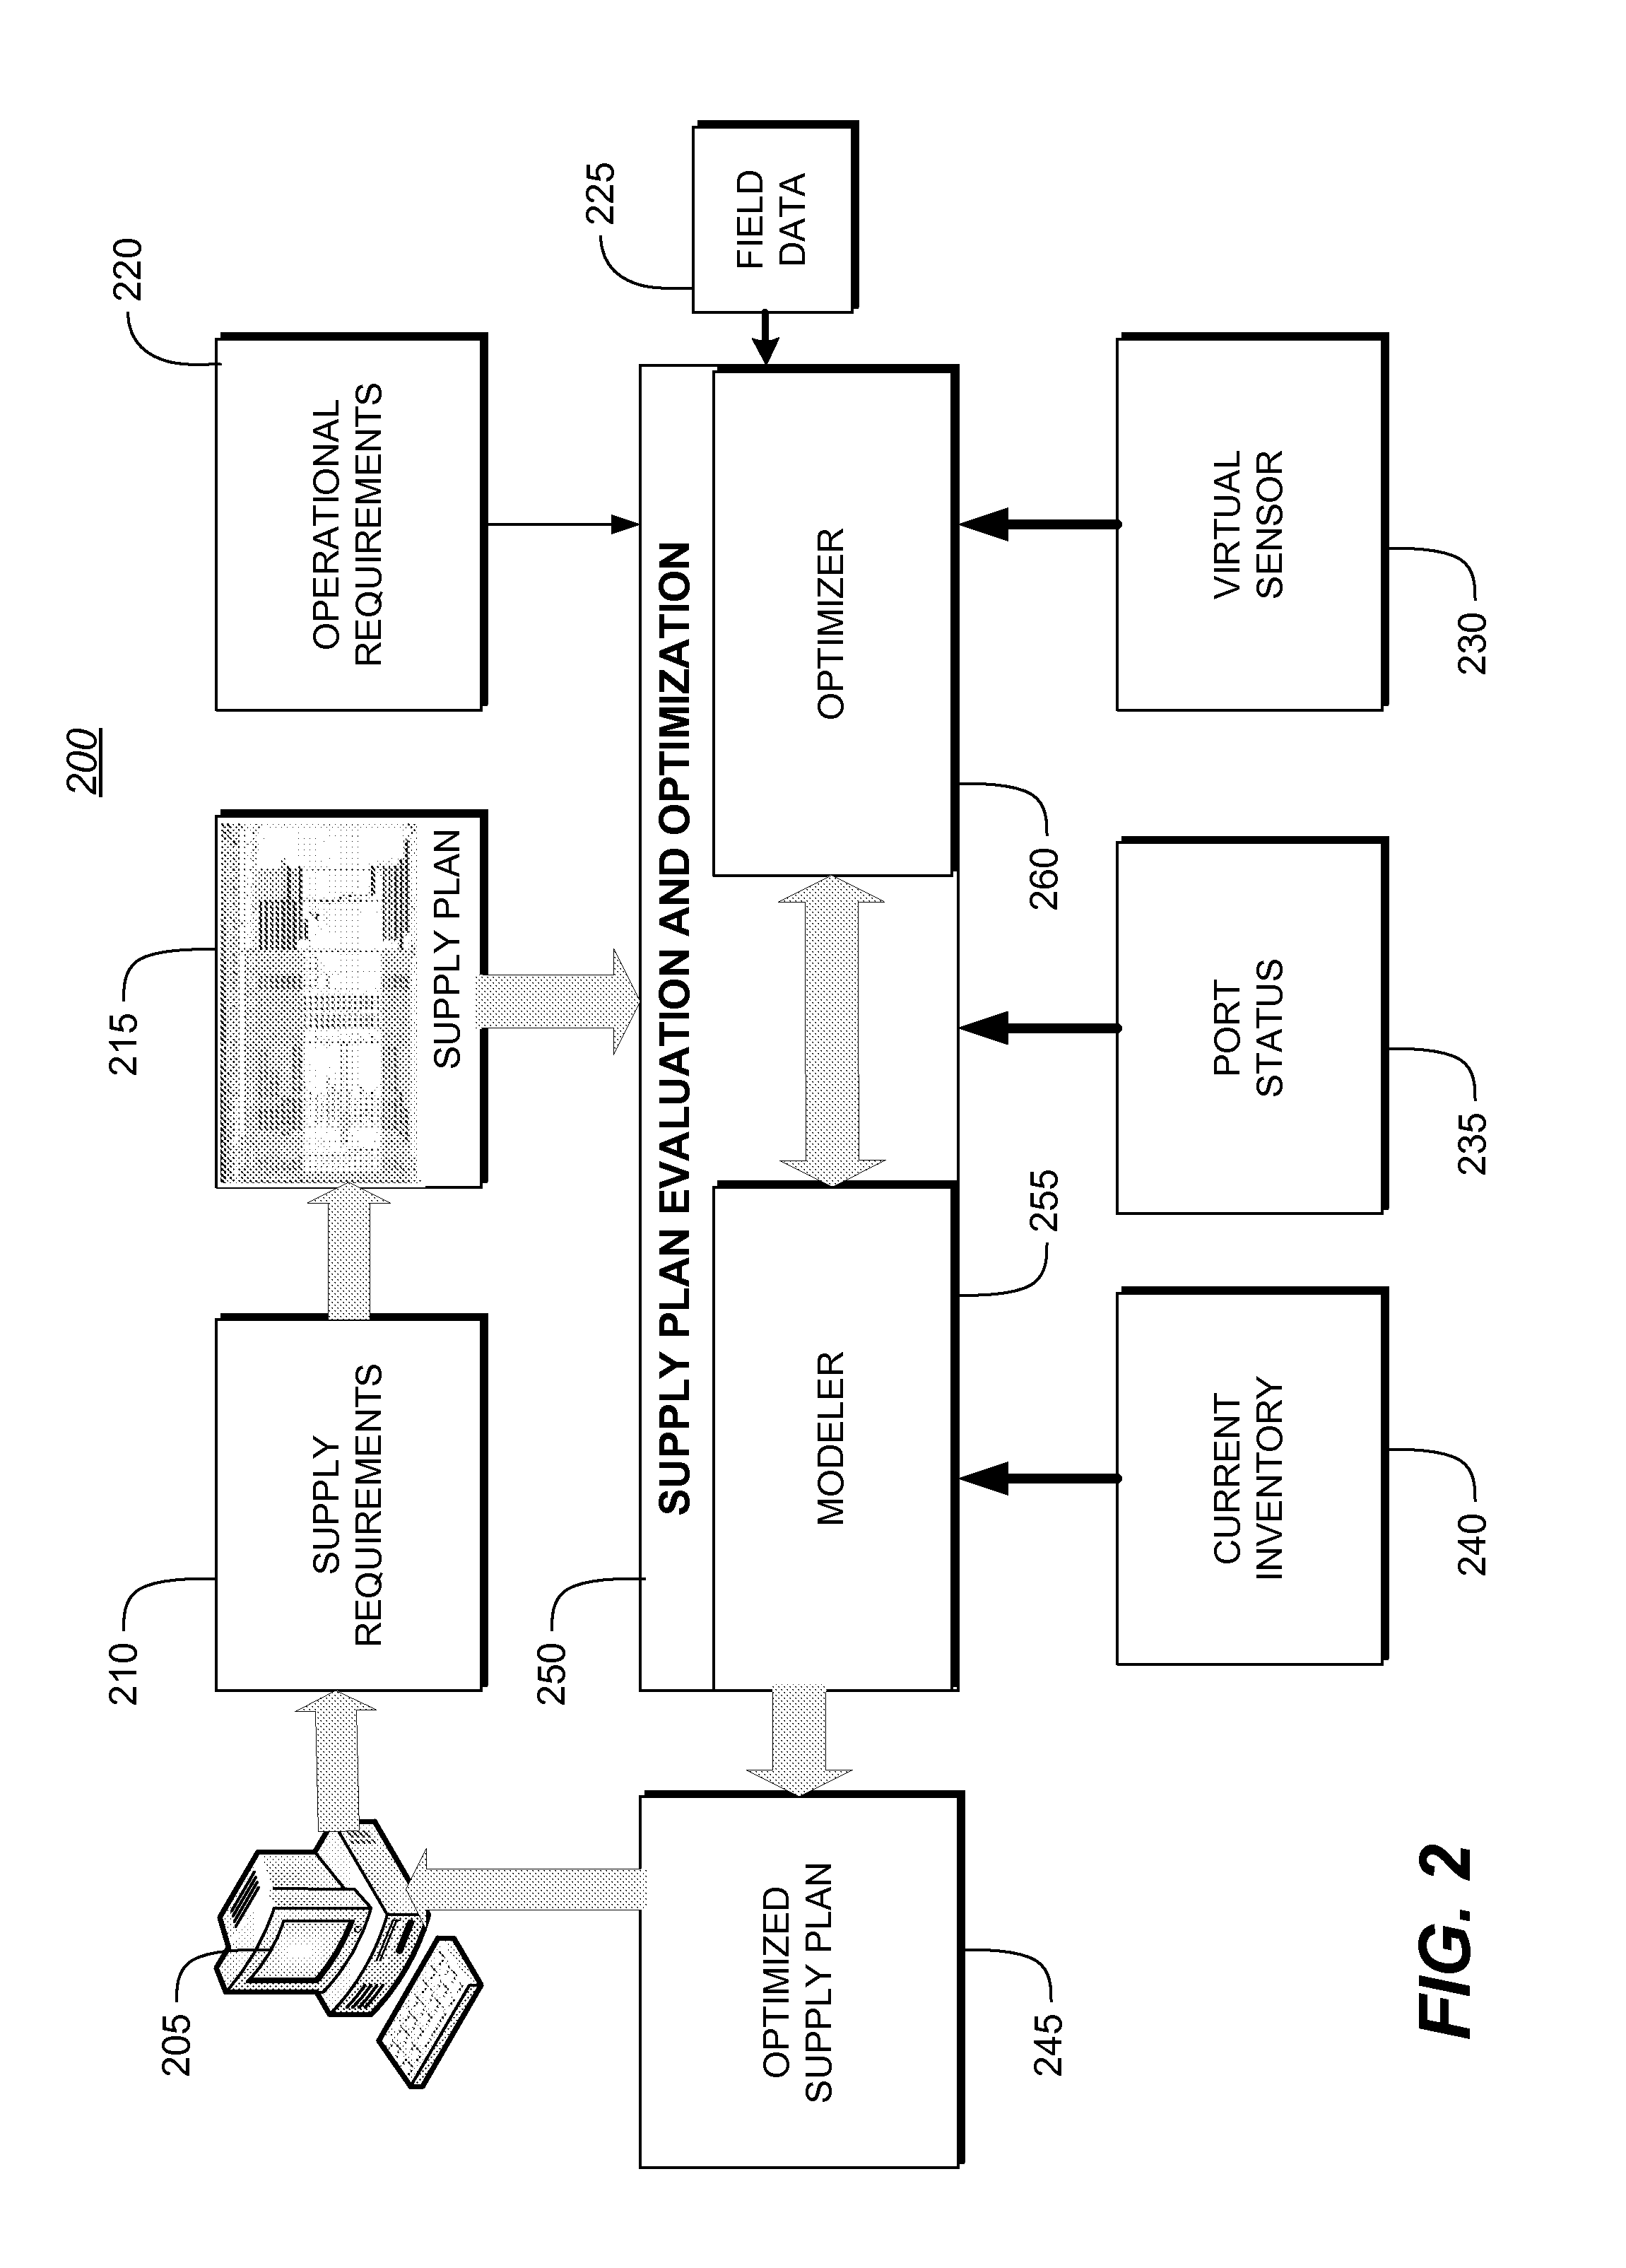 Systems, methods and apparatus for supply plan generation and optimization